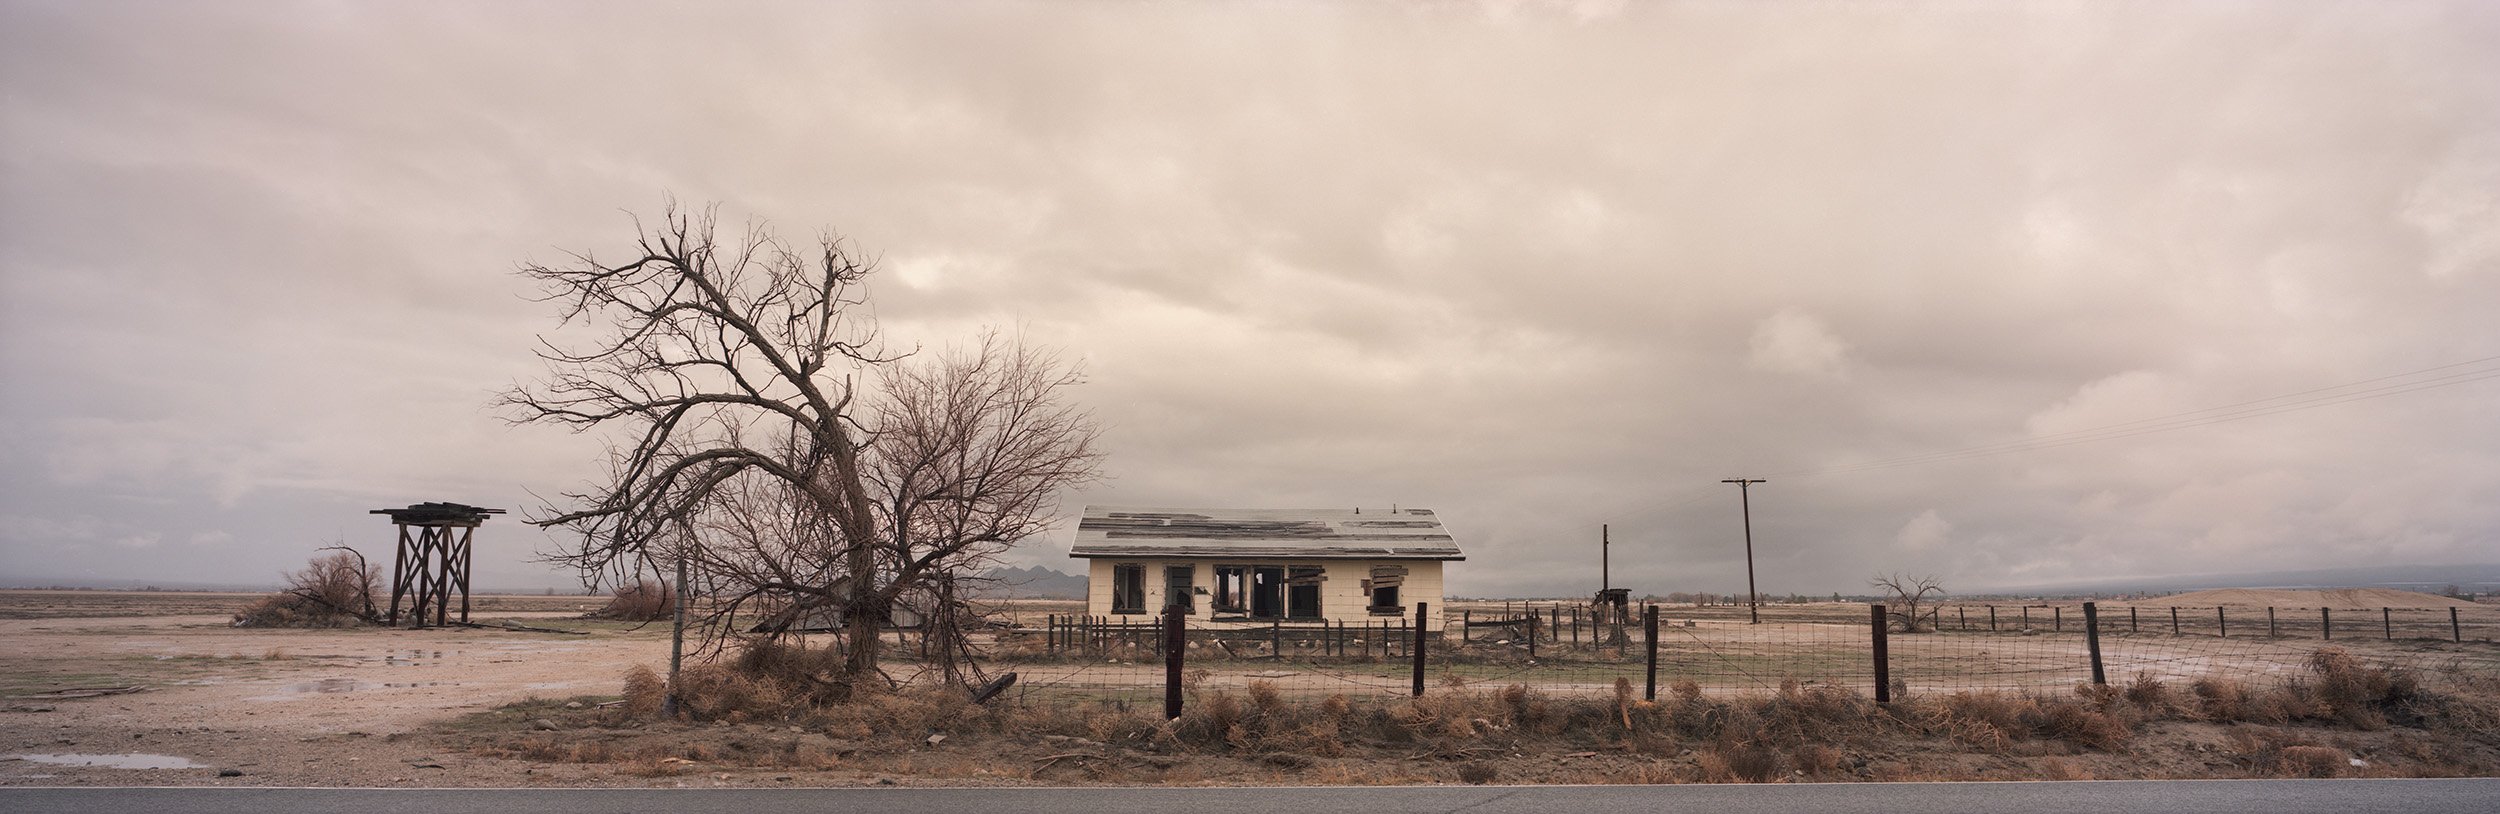   Lucerne Valley. January 11, 2015  